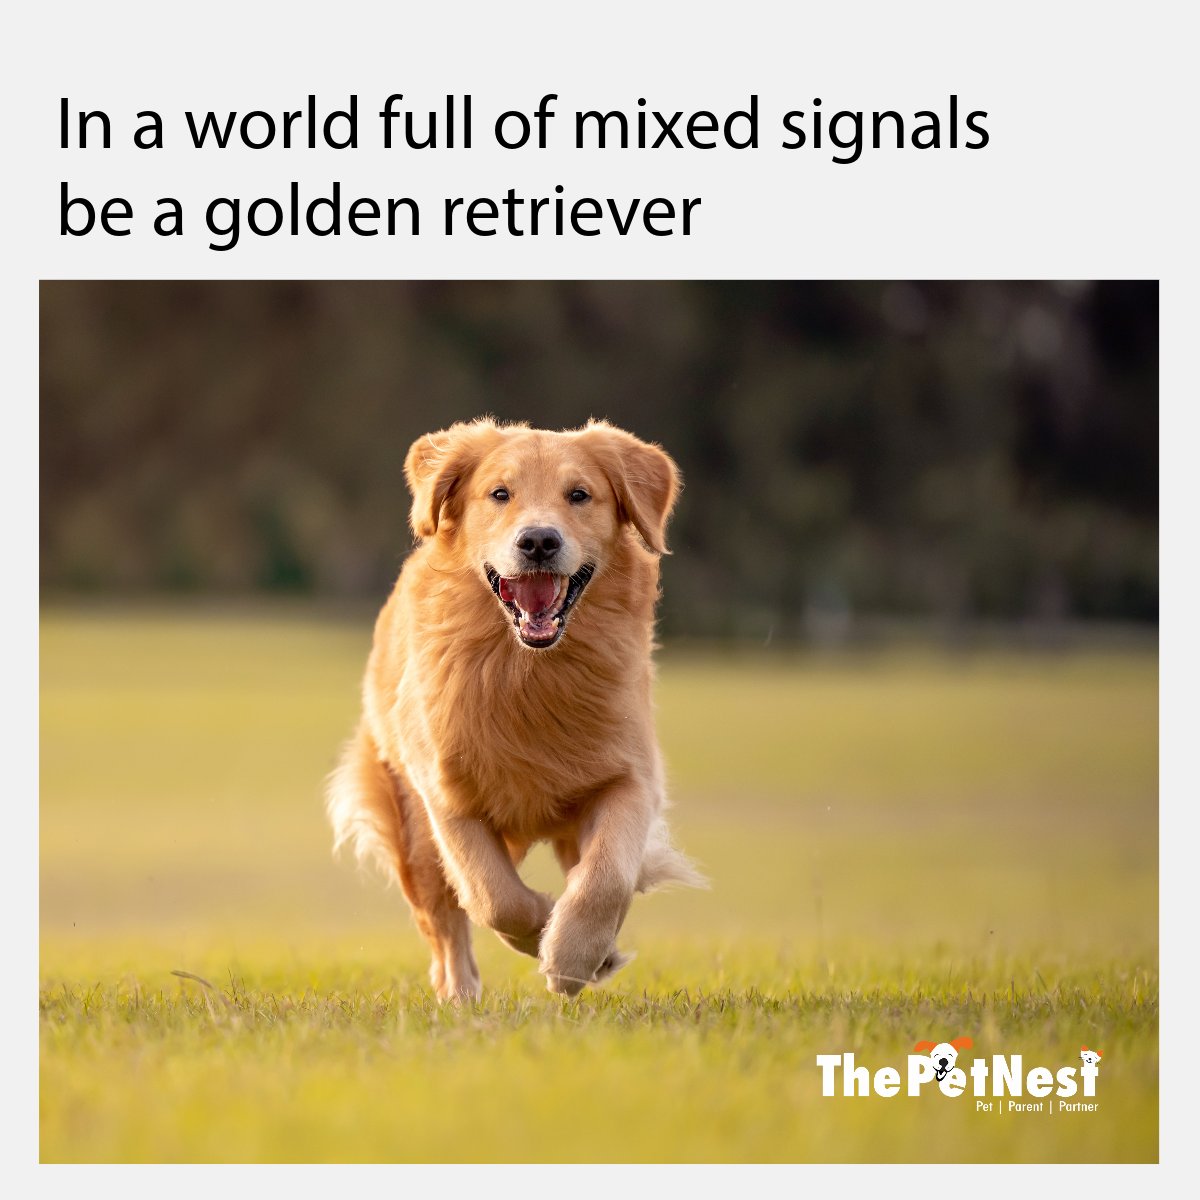 Golden Retrievers’ are cute, aren’t they?
Tap to agree✅🩷
#GoldenRetrievers #dogs